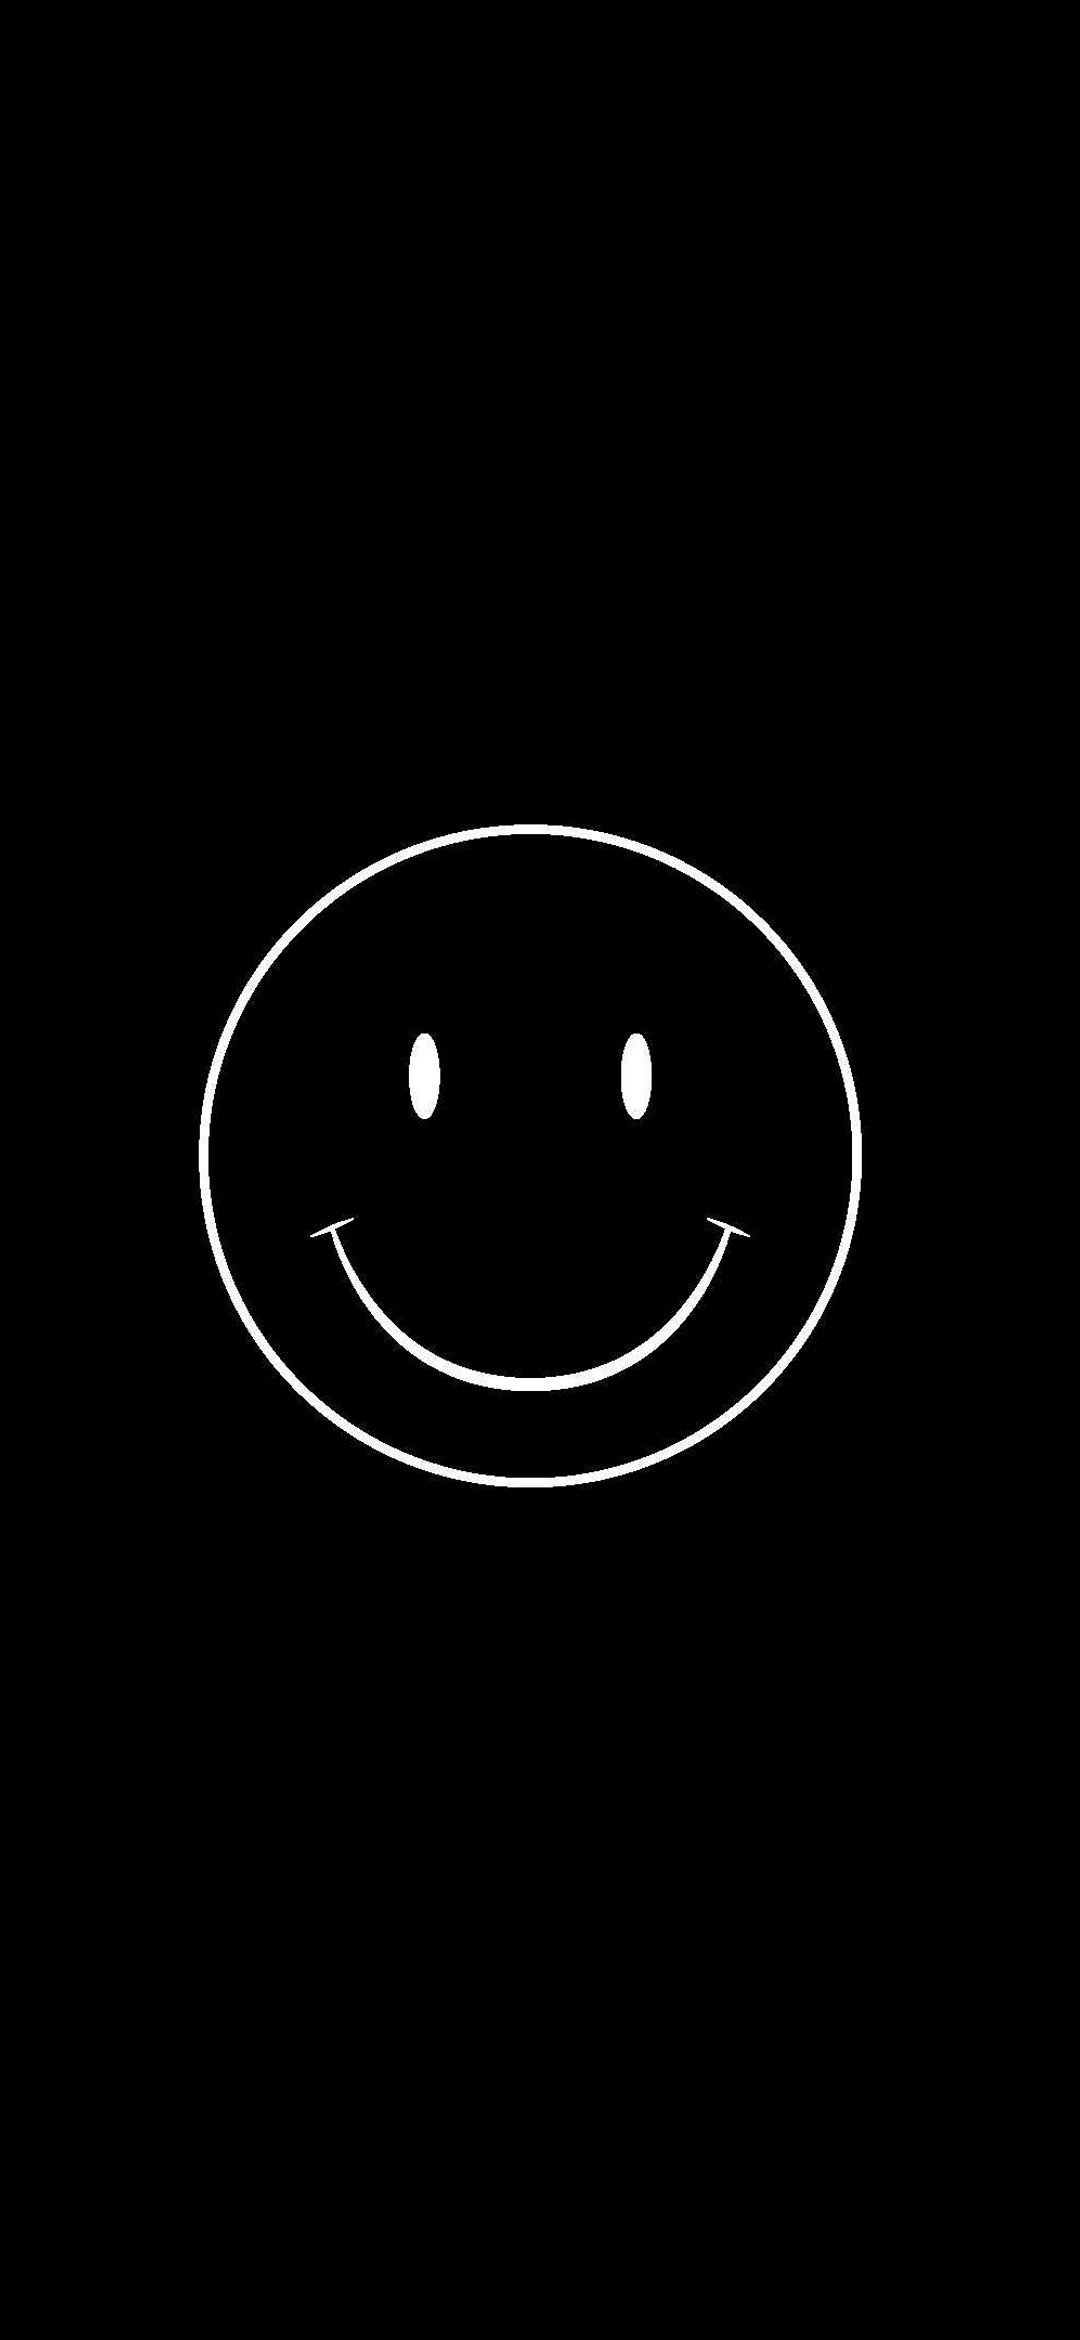 Smiley Face Smile Wallpaper Download | MobCup